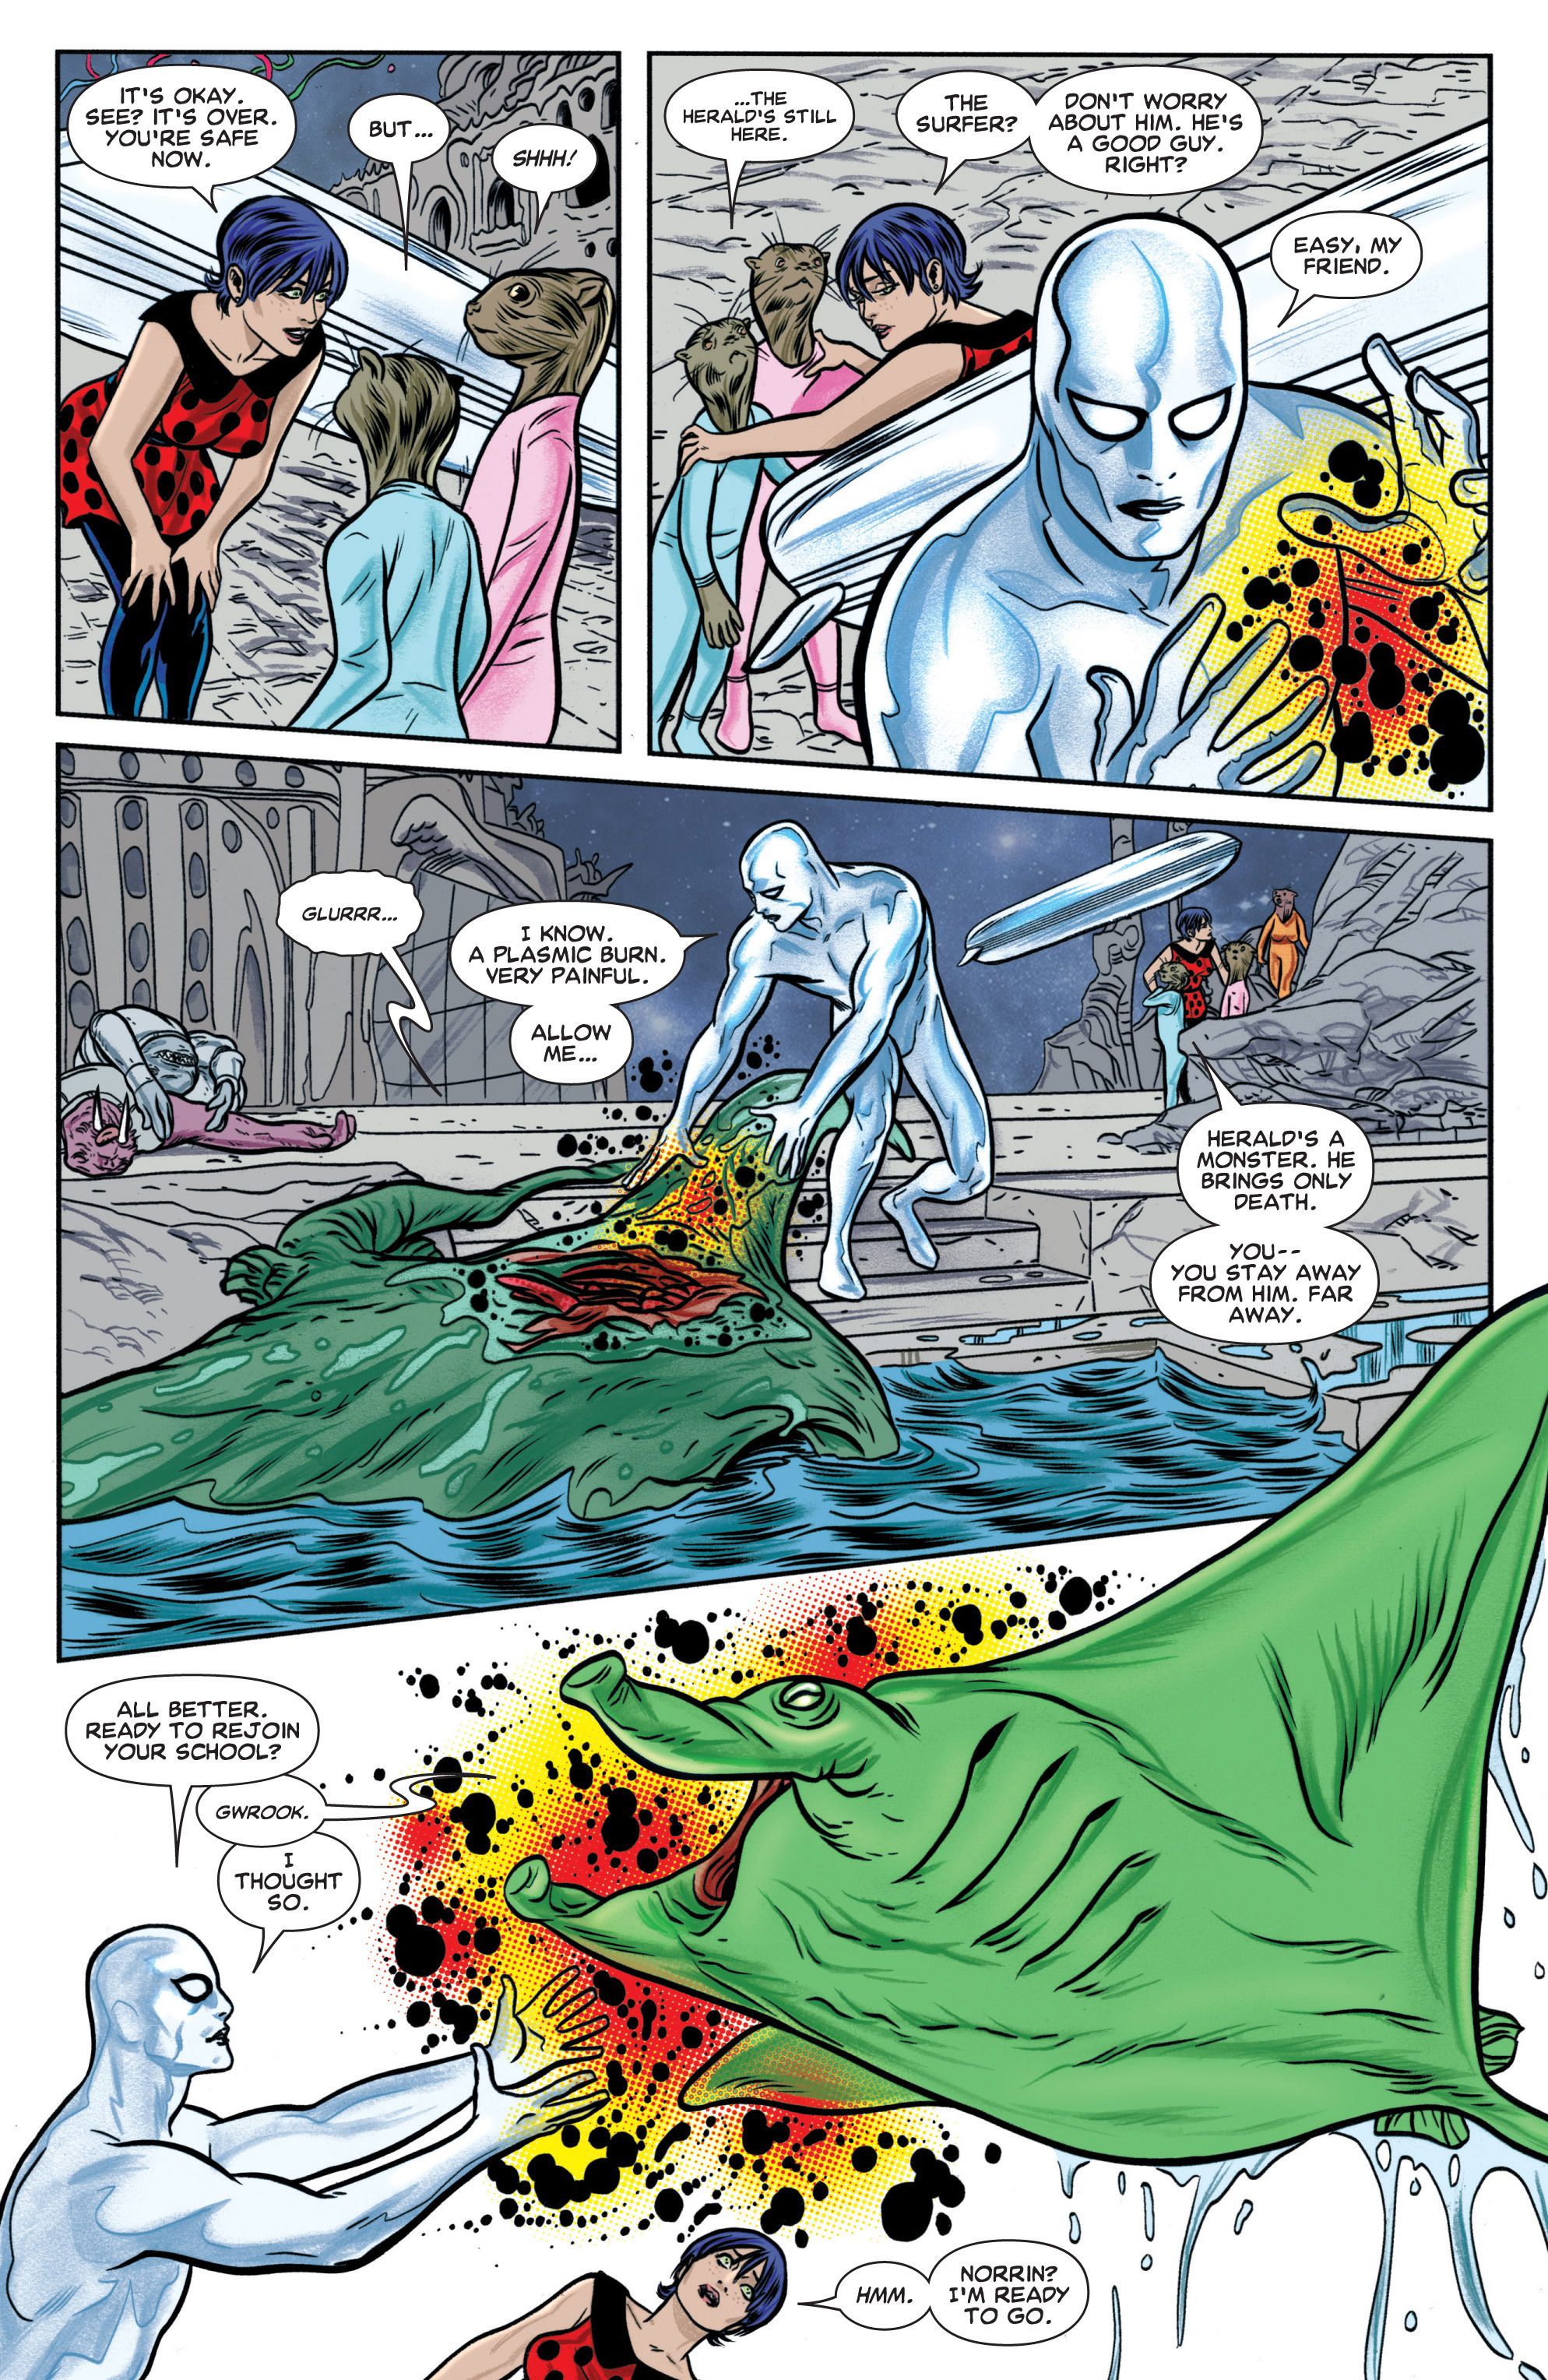 Silver Surfer helps heal a cosmic ray